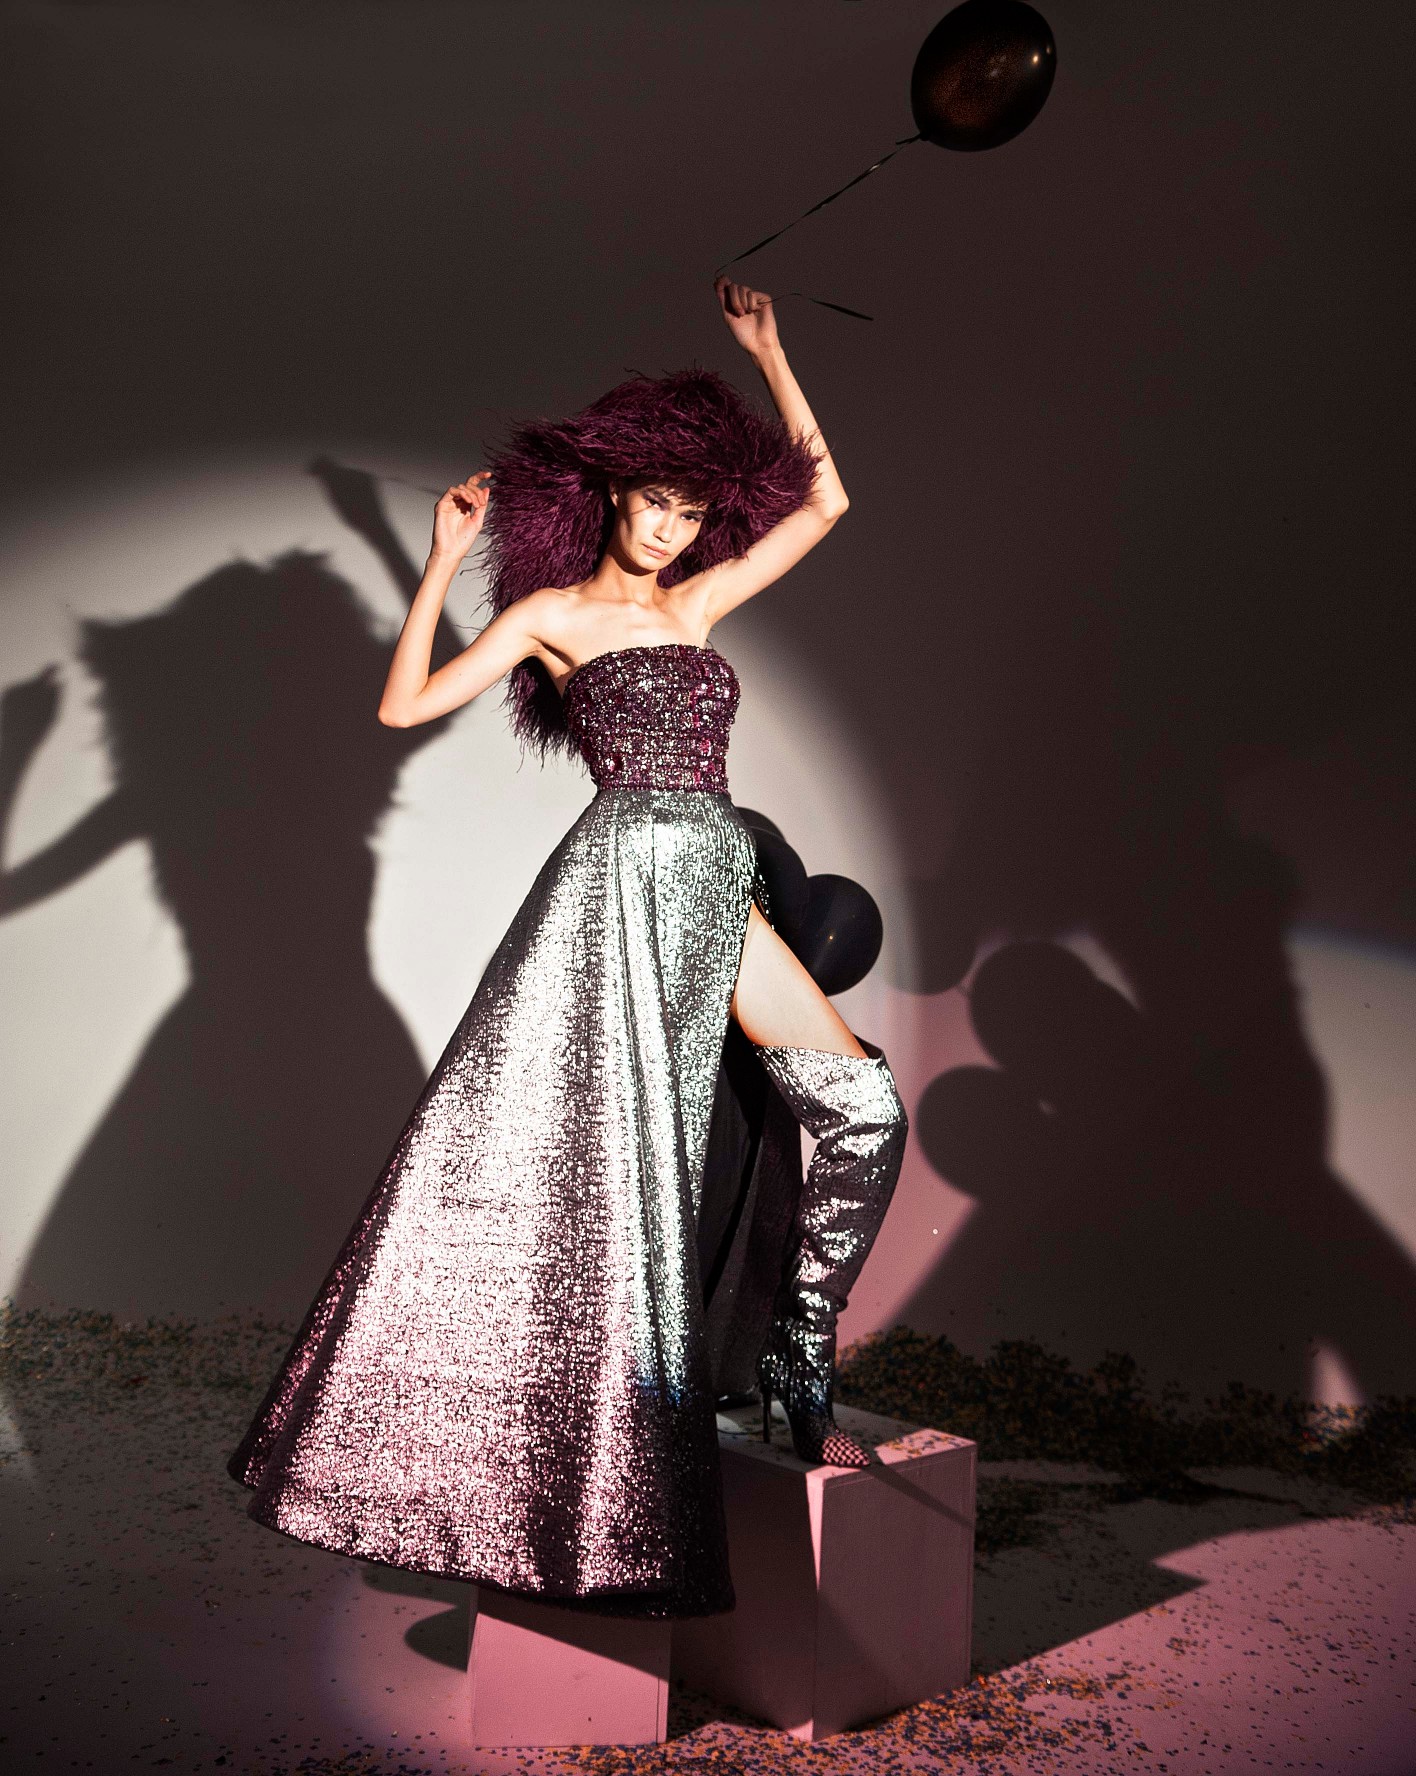 FW19-20 Metallic Broquard Ball Gown Embellished With Crystals, Sequins And Raffia With A Side Slit .jpg